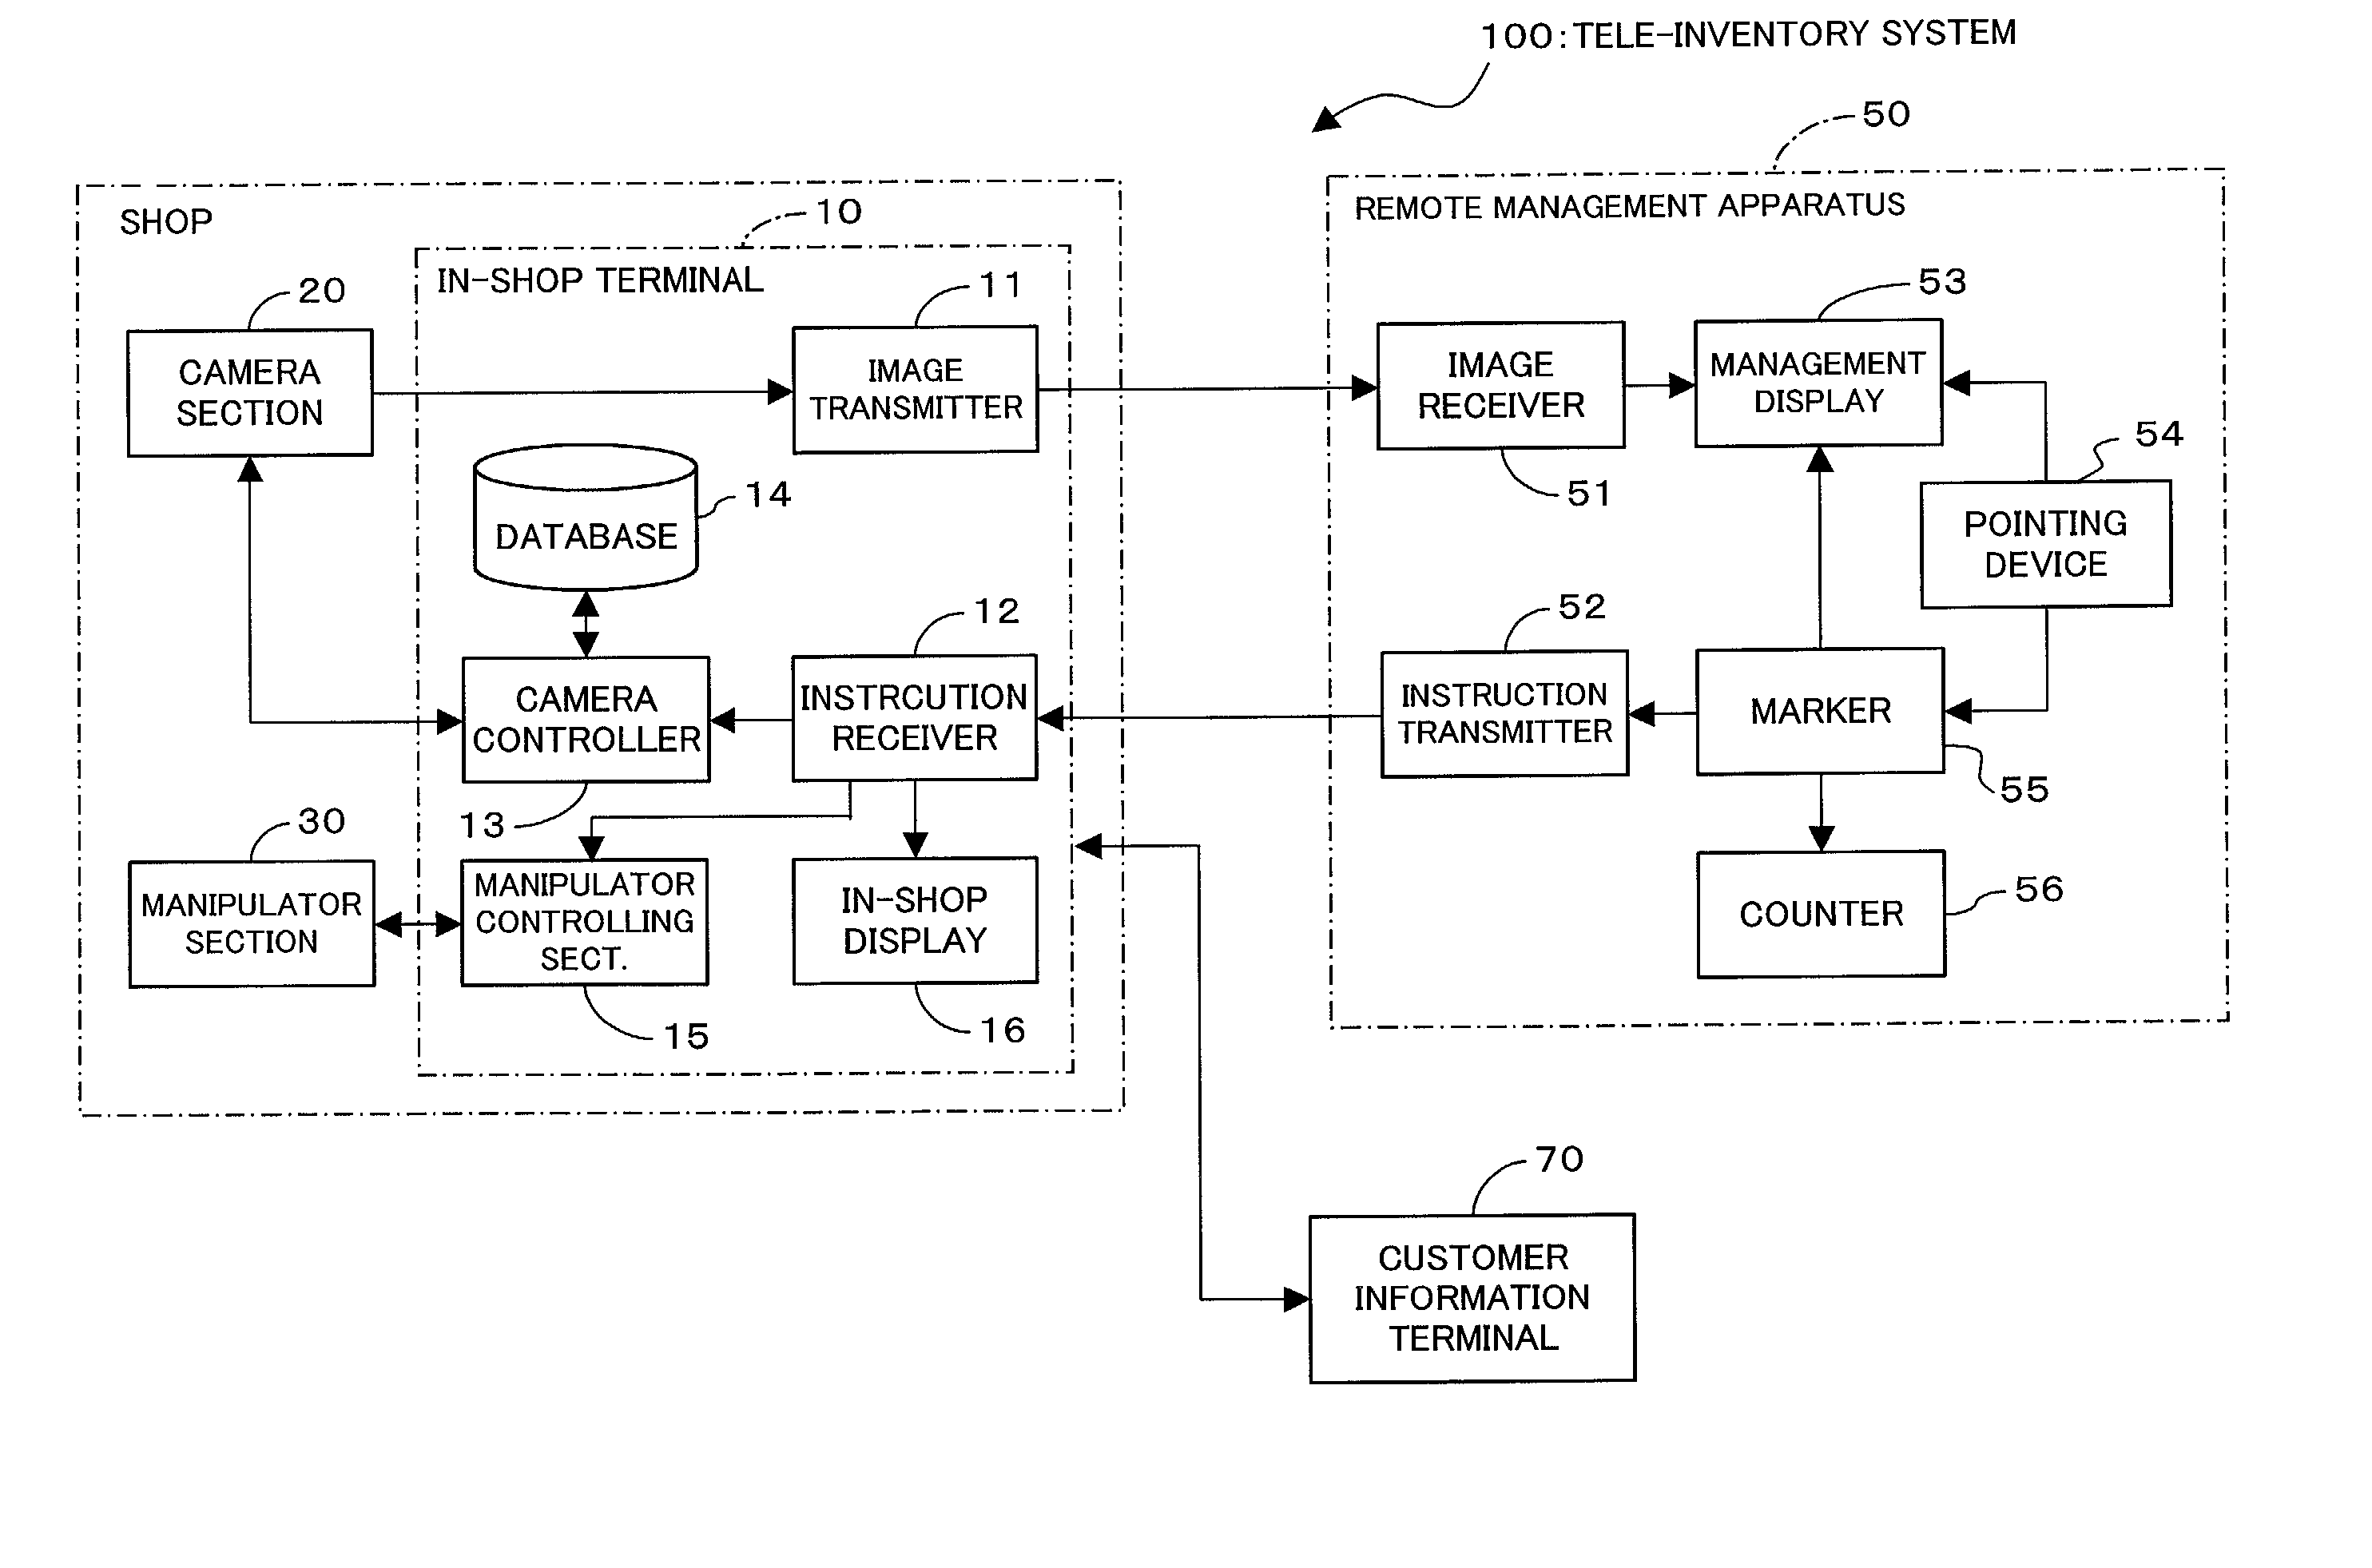 Tele-inventory system, and in-shop terminal and remote management apparatus for the system